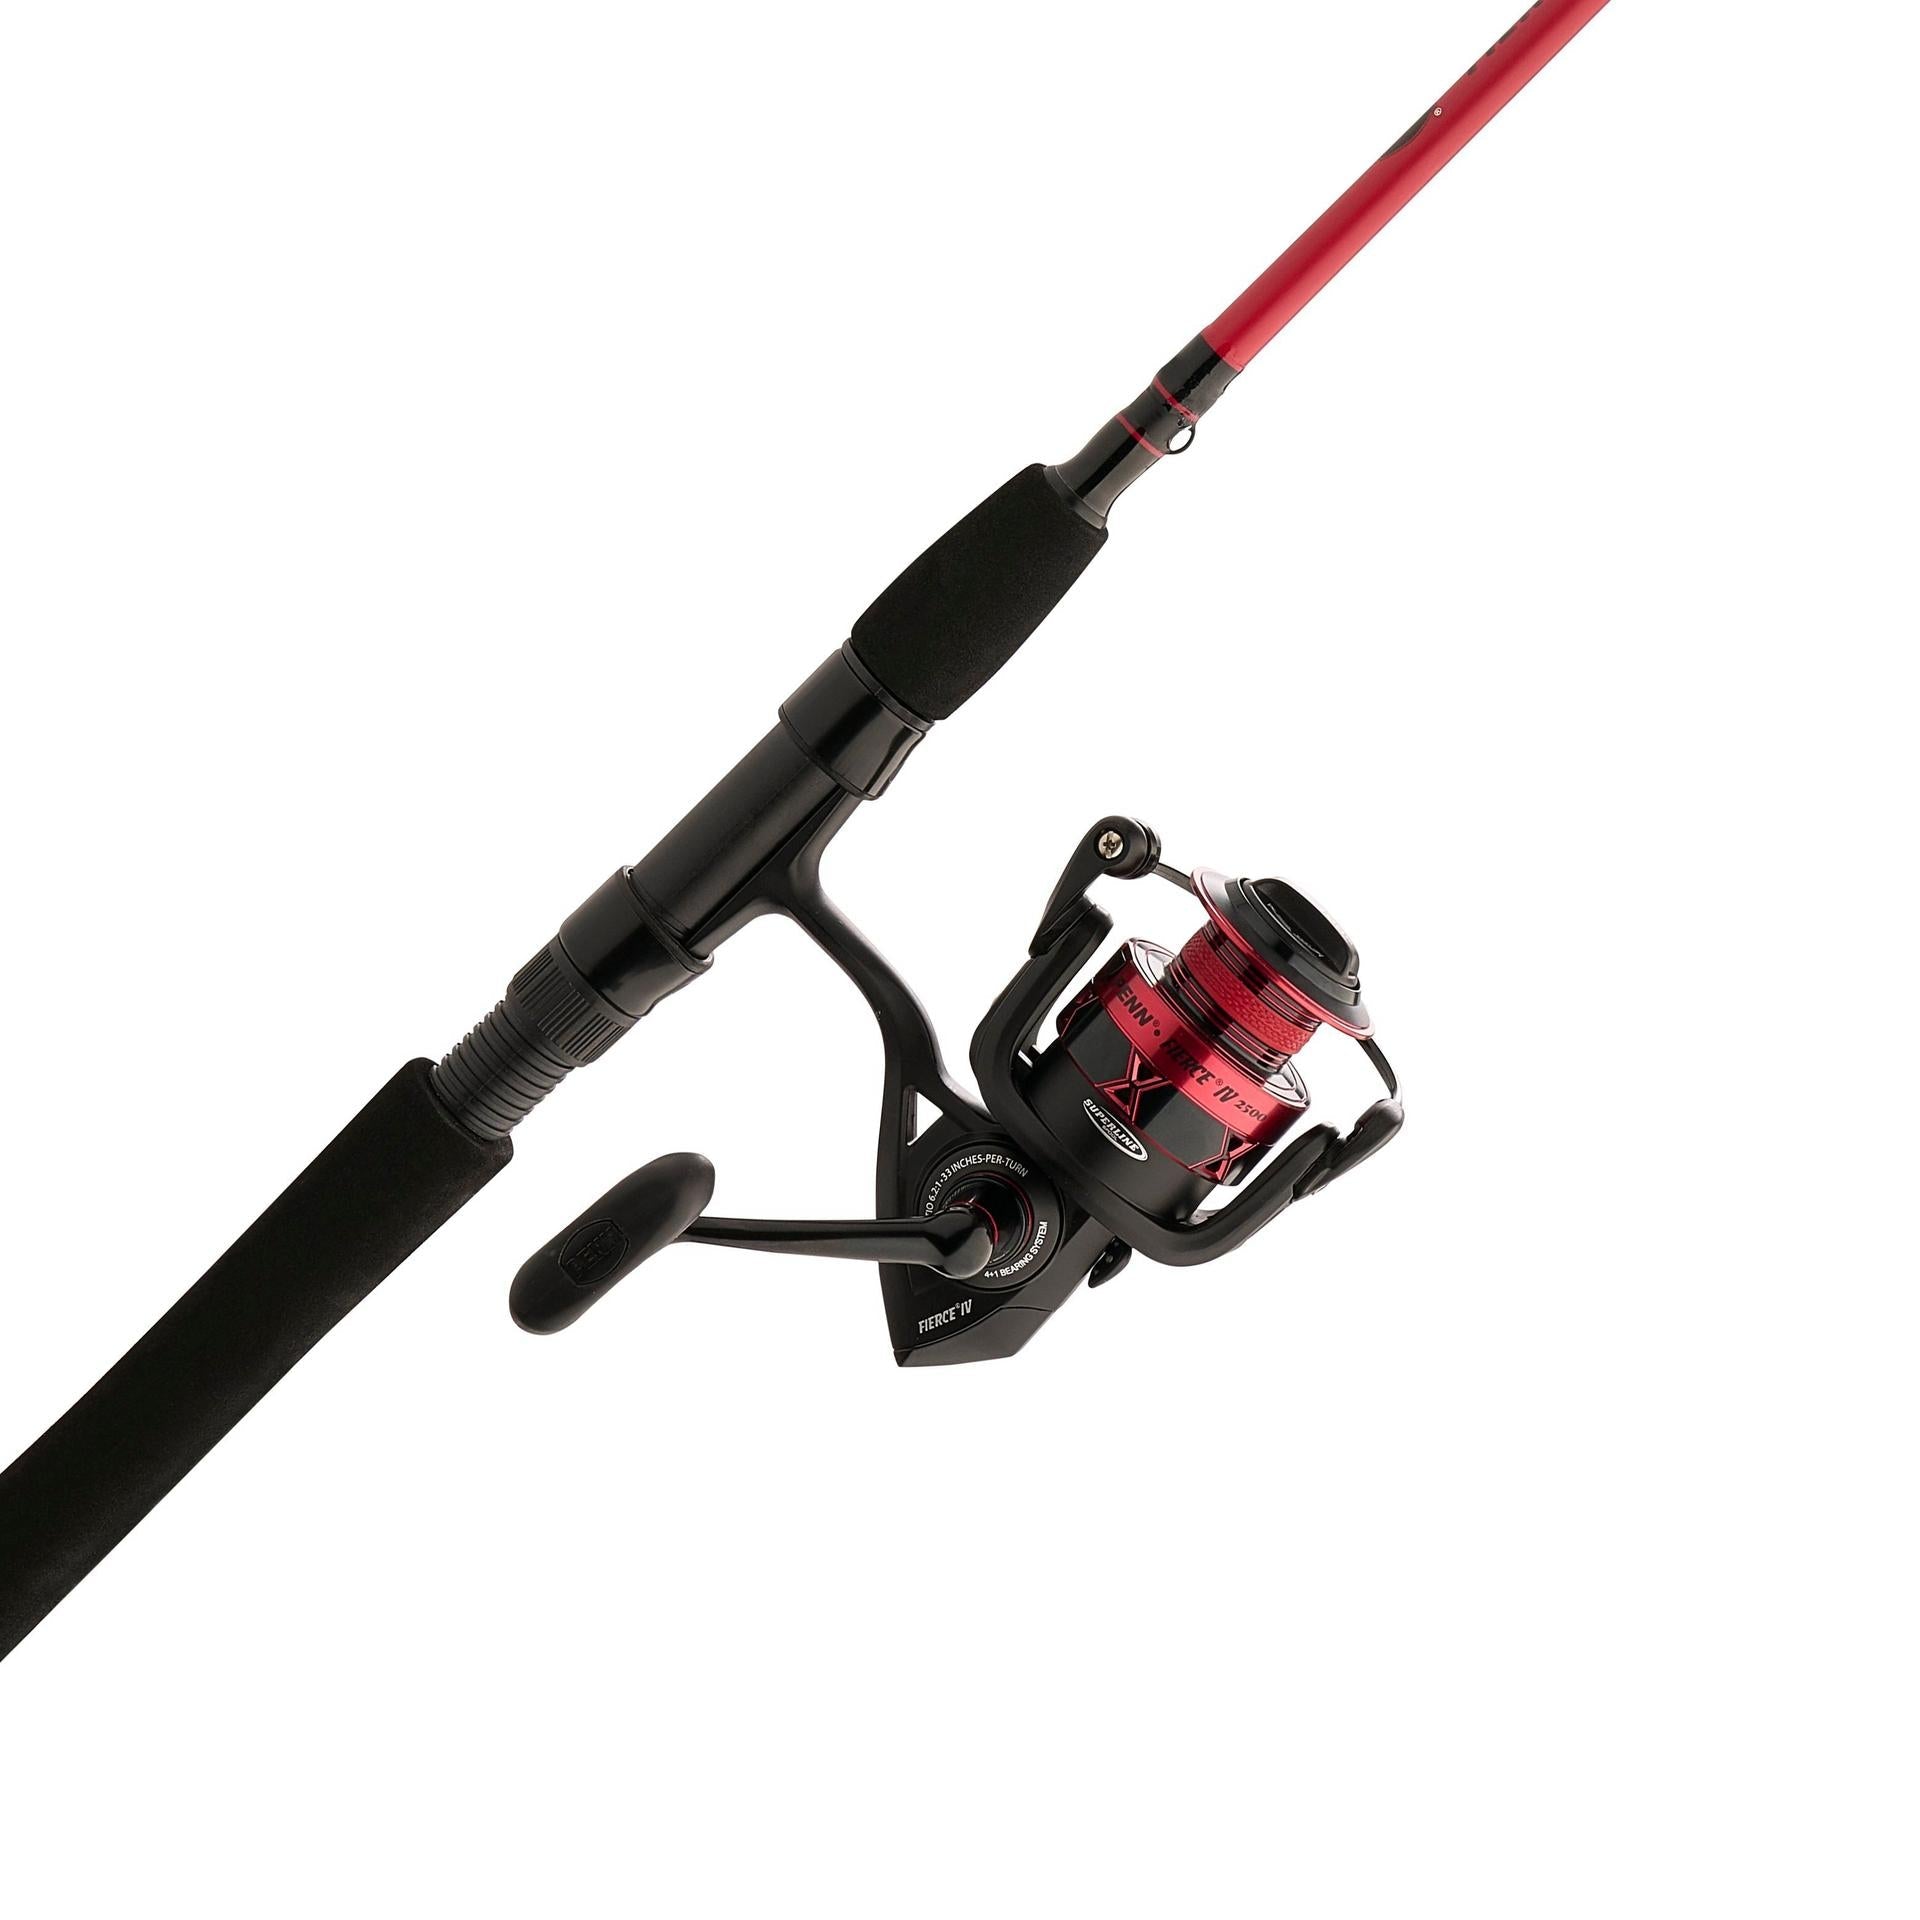 Best Rod And Reel Combo For Pier Fishing In Saltwater